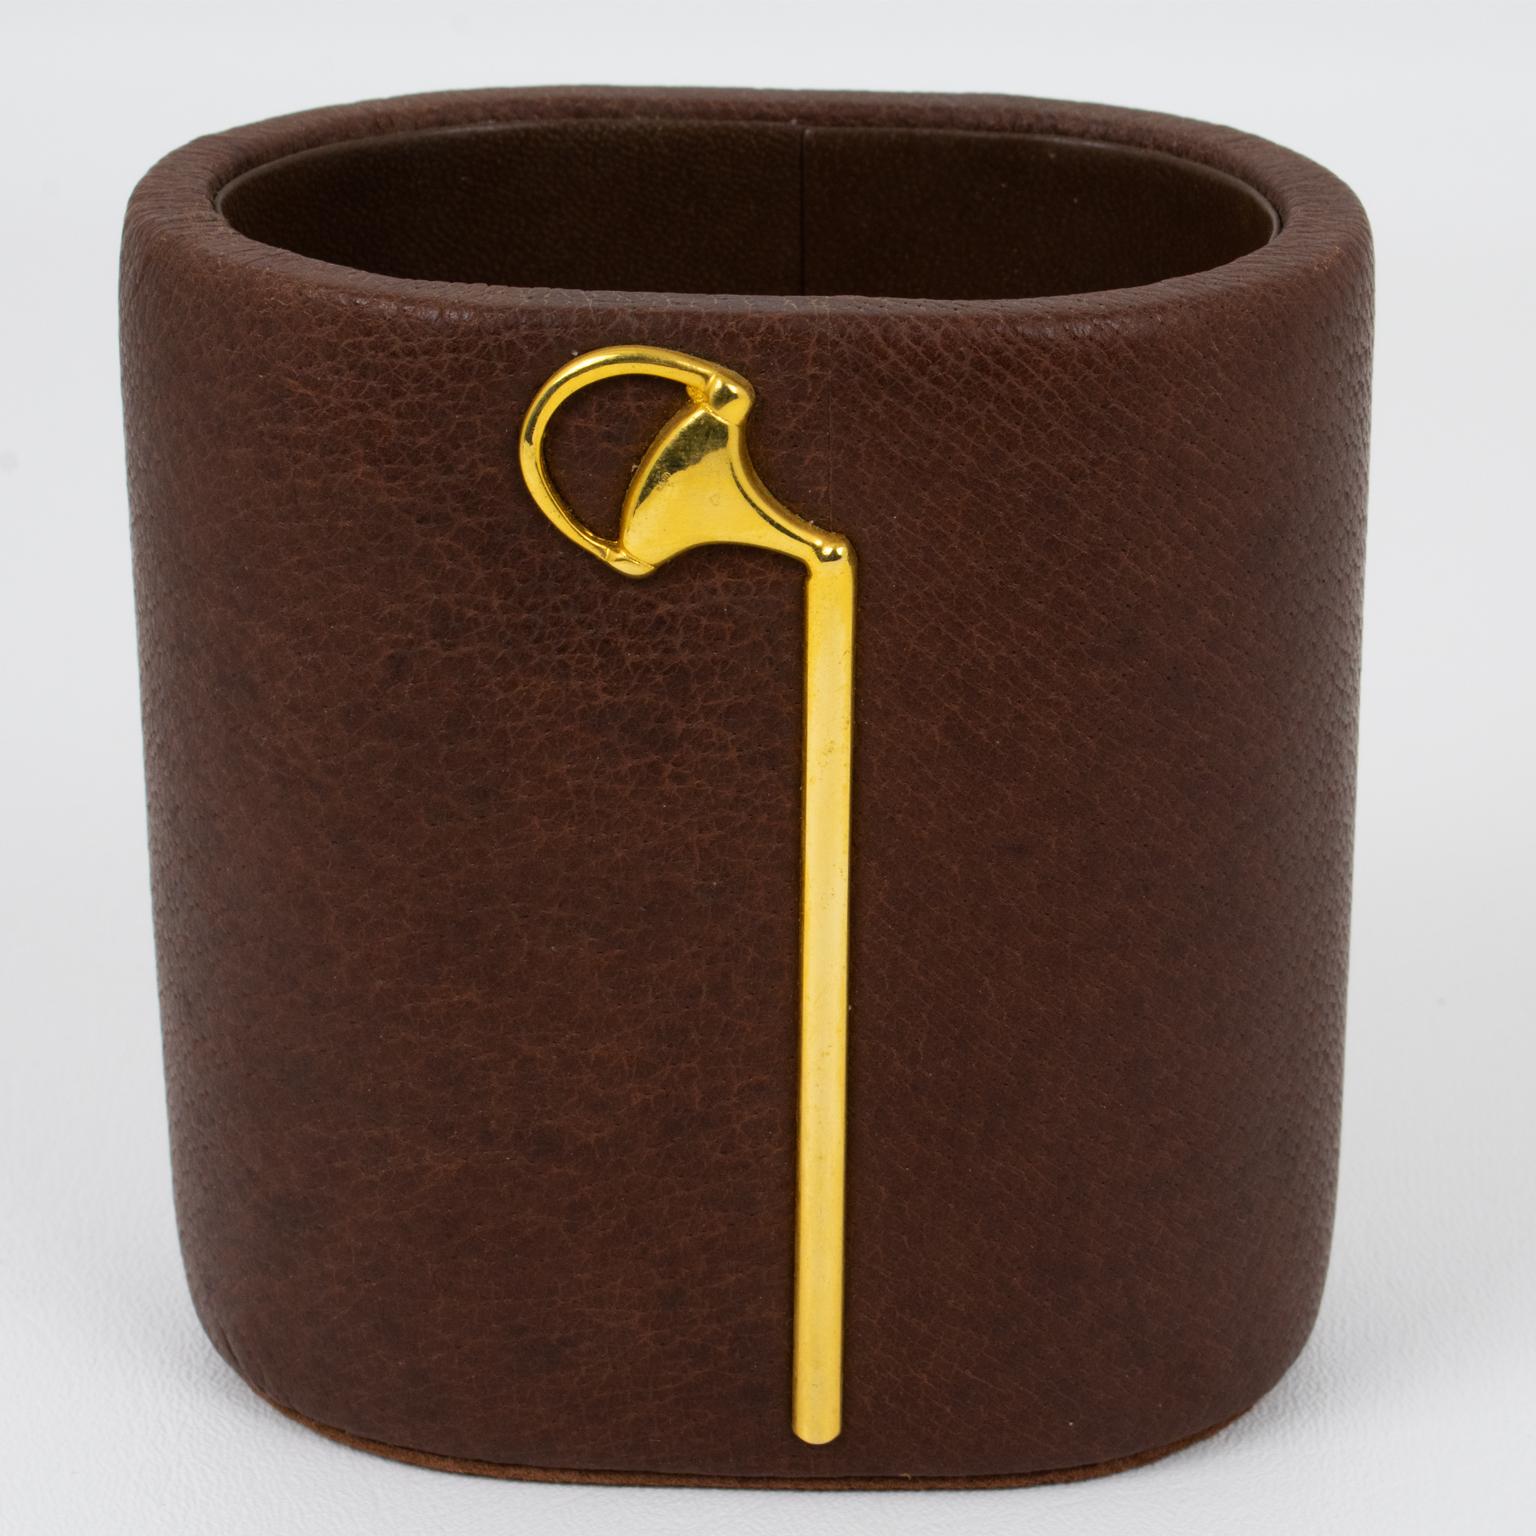 Gucci Italy designed this luxury modernist desktop accessory during the 1970s. The pen cup holder is made of cocoa brown fine calf leather and is ornated on both sides with a 24K gold plated equestrian decor. This gorgeous addition to your next